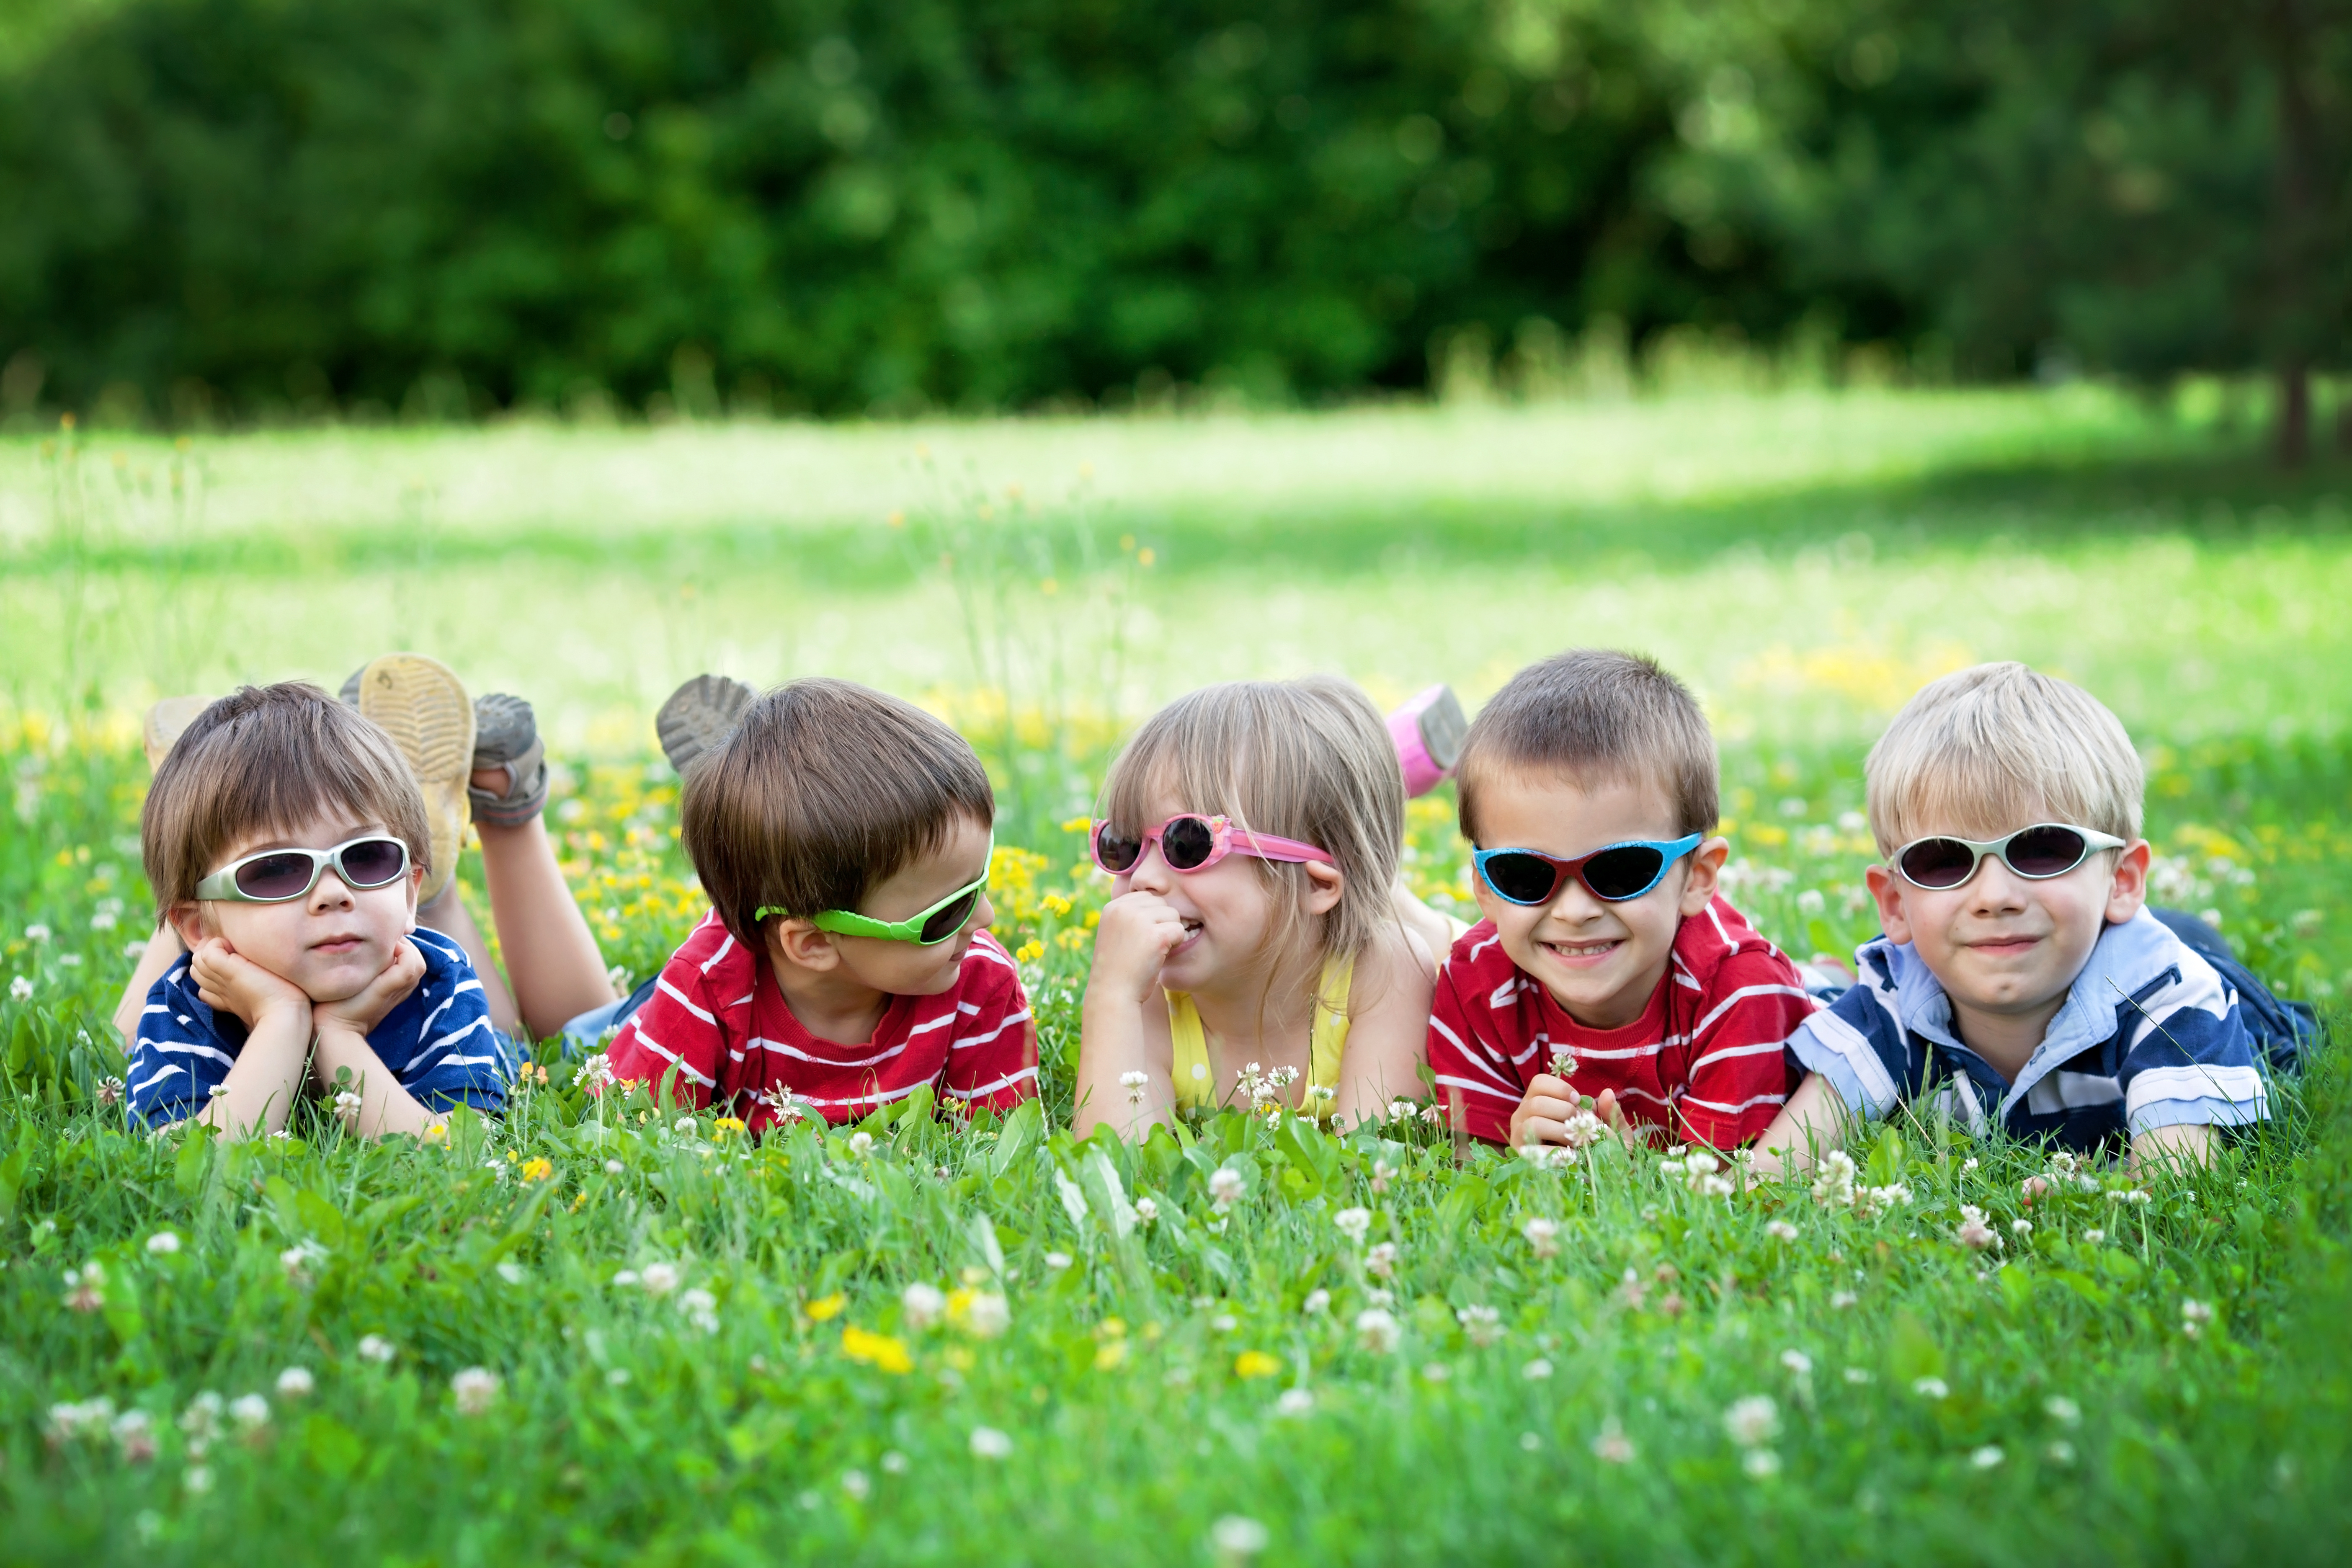 Five adorable kids, lying on the grass, smiling, having fun, wearing glasses